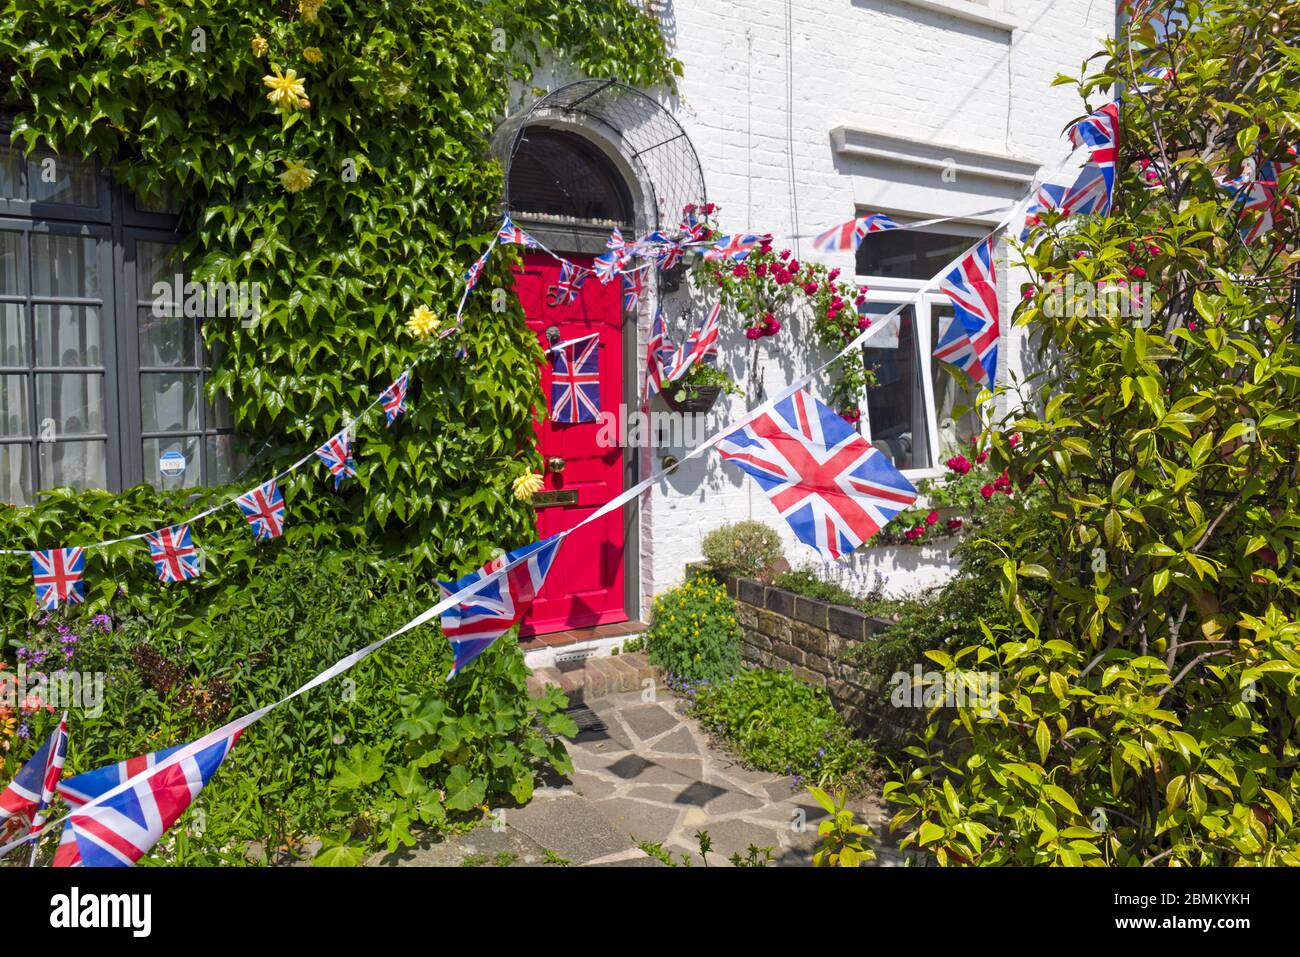 Union Jack Bunting hanging outside a house in South West London celebrating the 75th anniversary of Victory in Europe. May 2012. Stock Photo